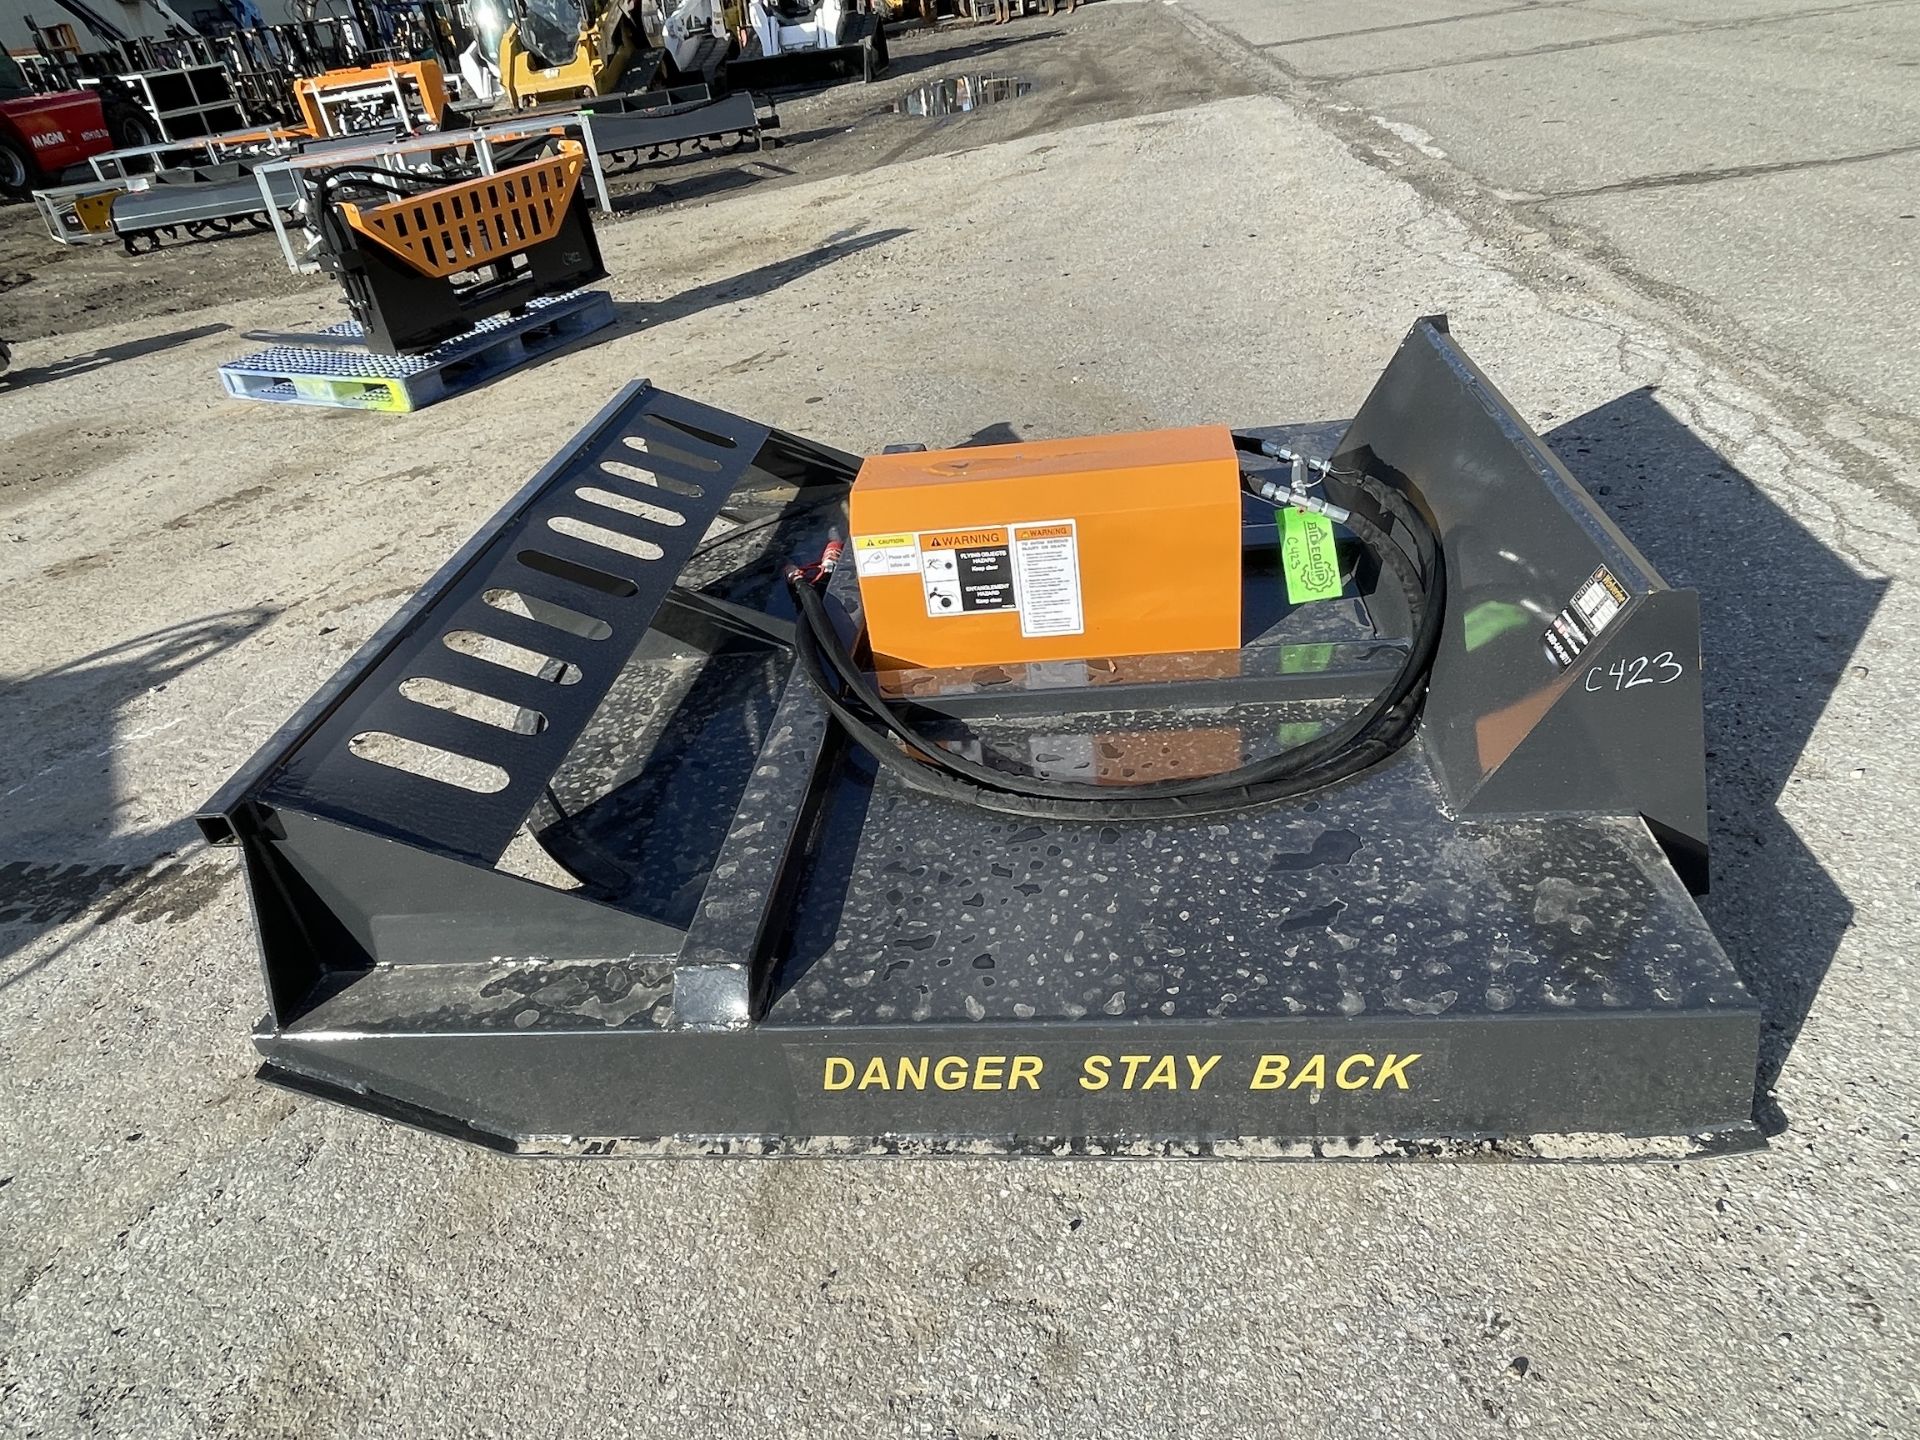 Brand New 72" Skid Steer Brush Cutter Attachment (C423E) - Image 5 of 10